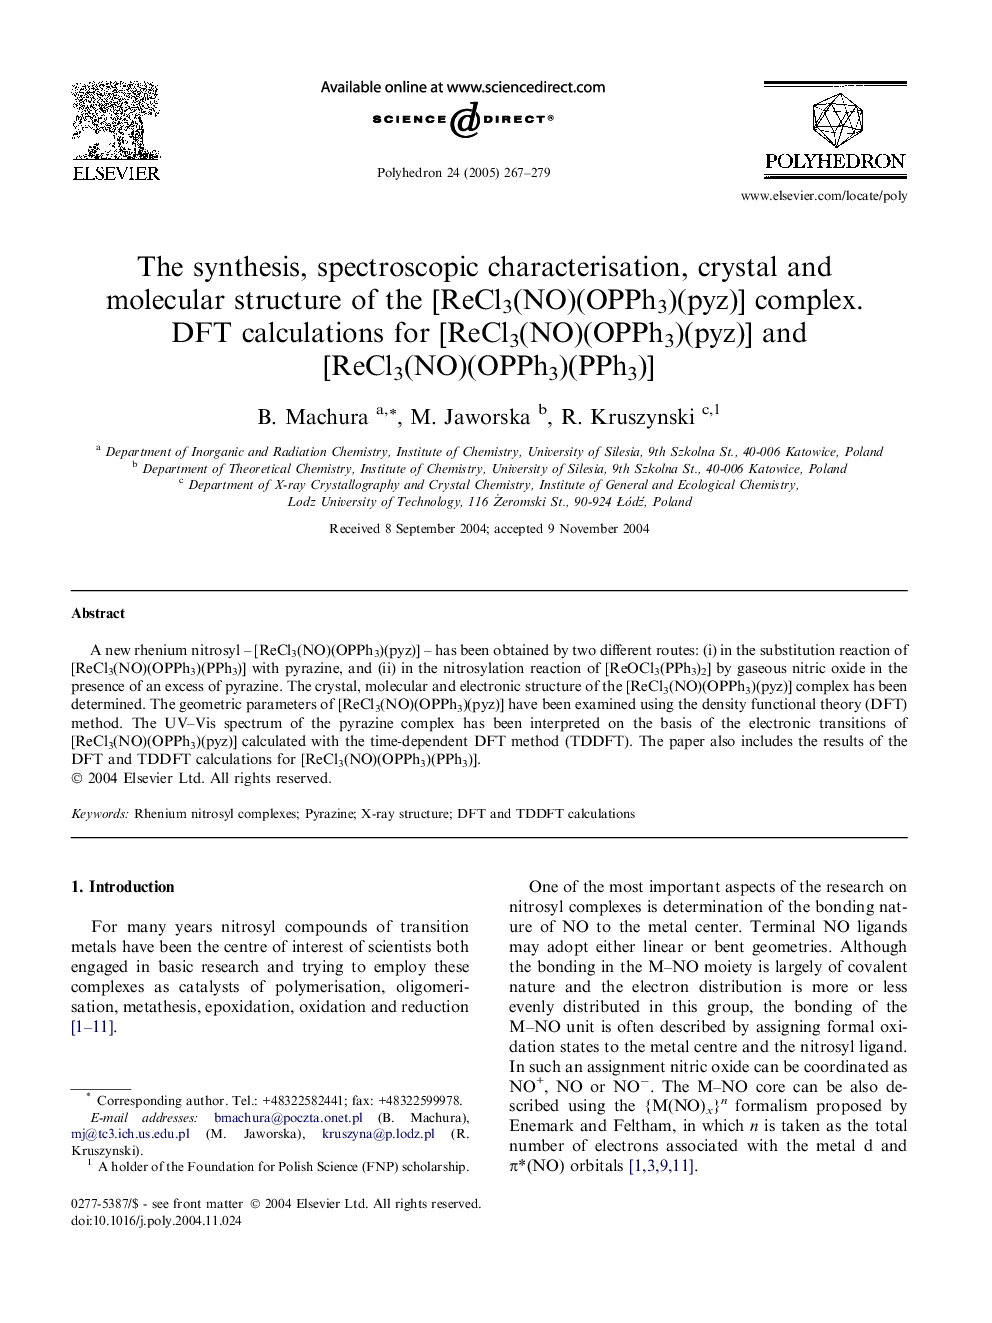 The synthesis, spectroscopic characterisation, crystal and molecular structure of the [ReCl3(NO)(OPPh3)(pyz)] complex. DFT calculations for [ReCl3(NO)(OPPh3)(pyz)] and [ReCl3(NO)(OPPh3)(PPh3)]